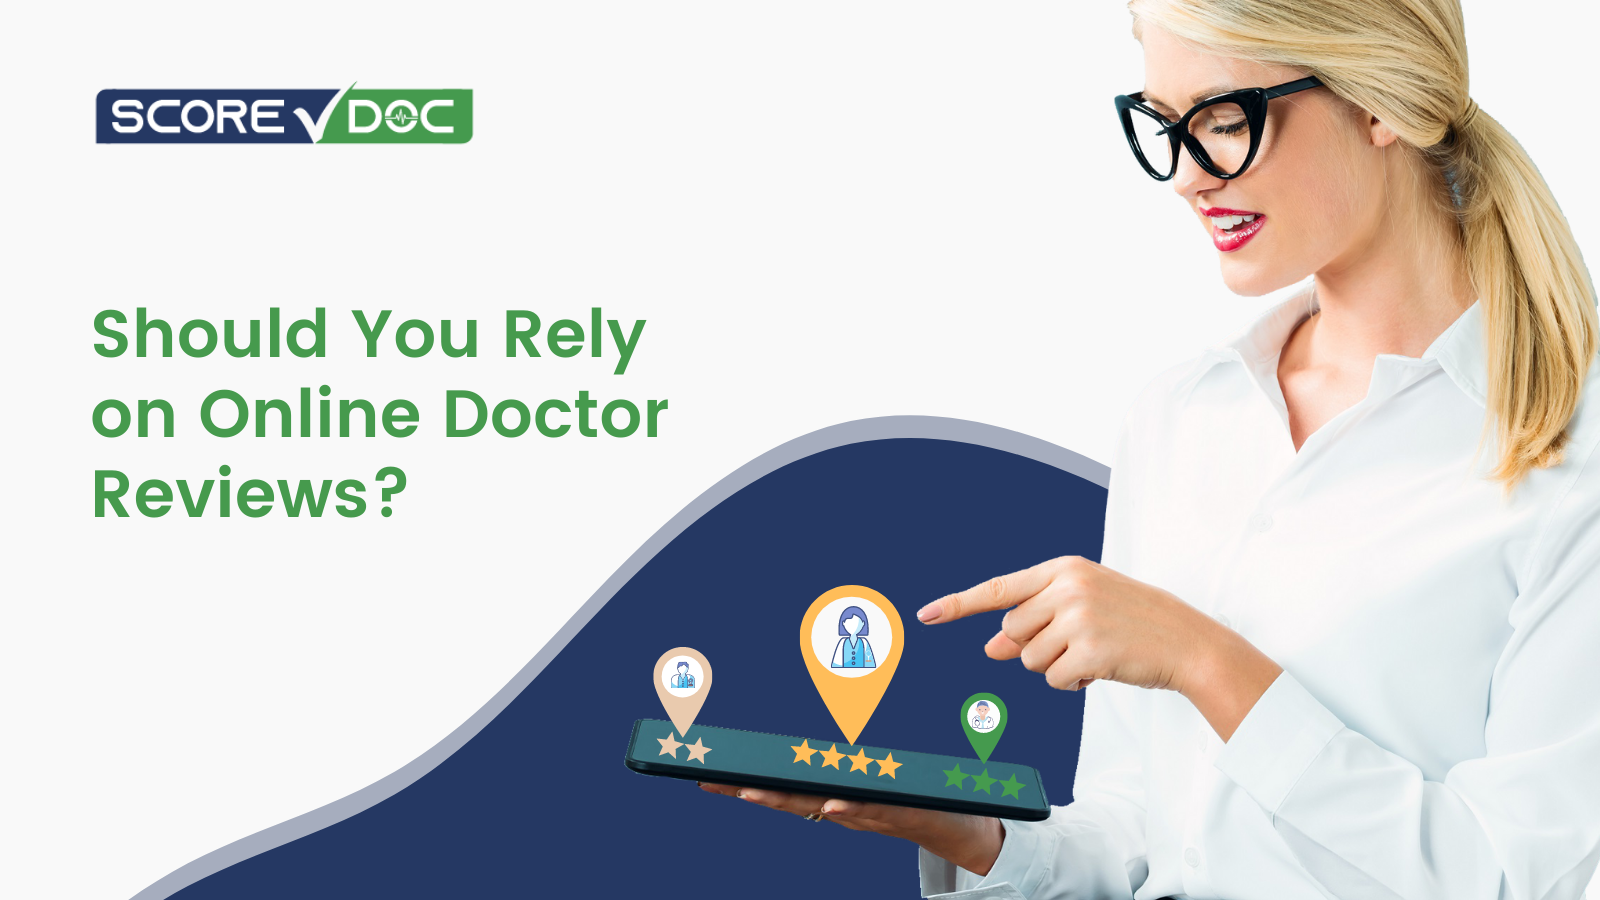 Should You Rely on Online Doctor Reviews?